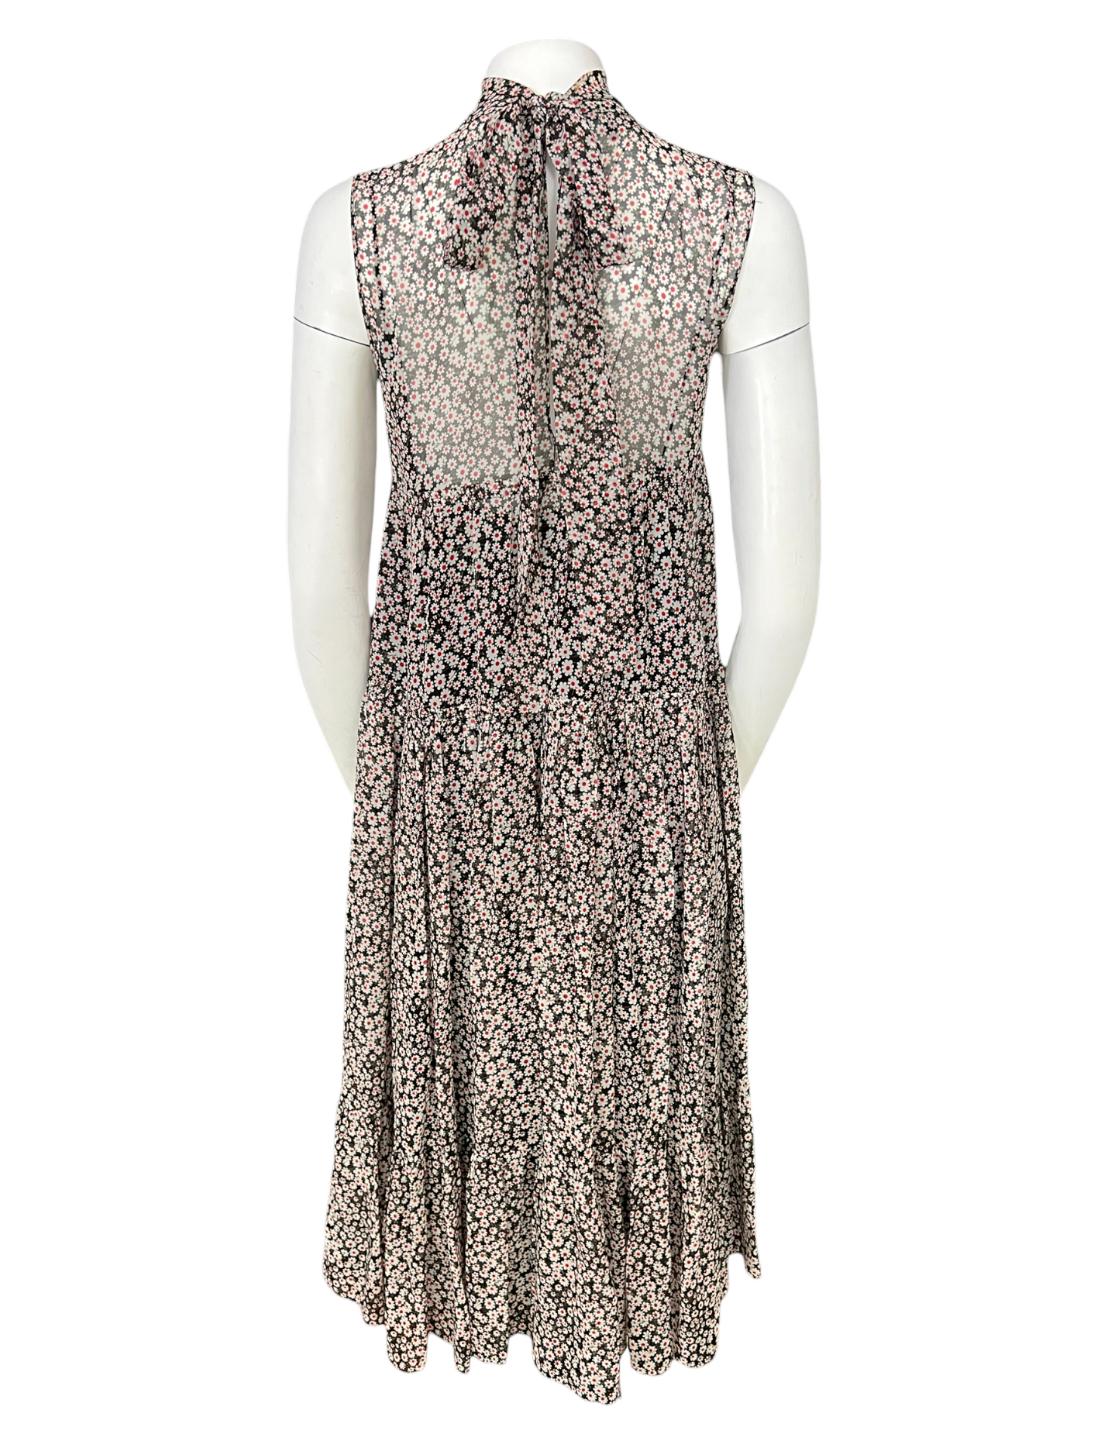 Rochas Paris Silk Midi Dress, Size 40 In Excellent Condition For Sale In Beverly Hills, CA